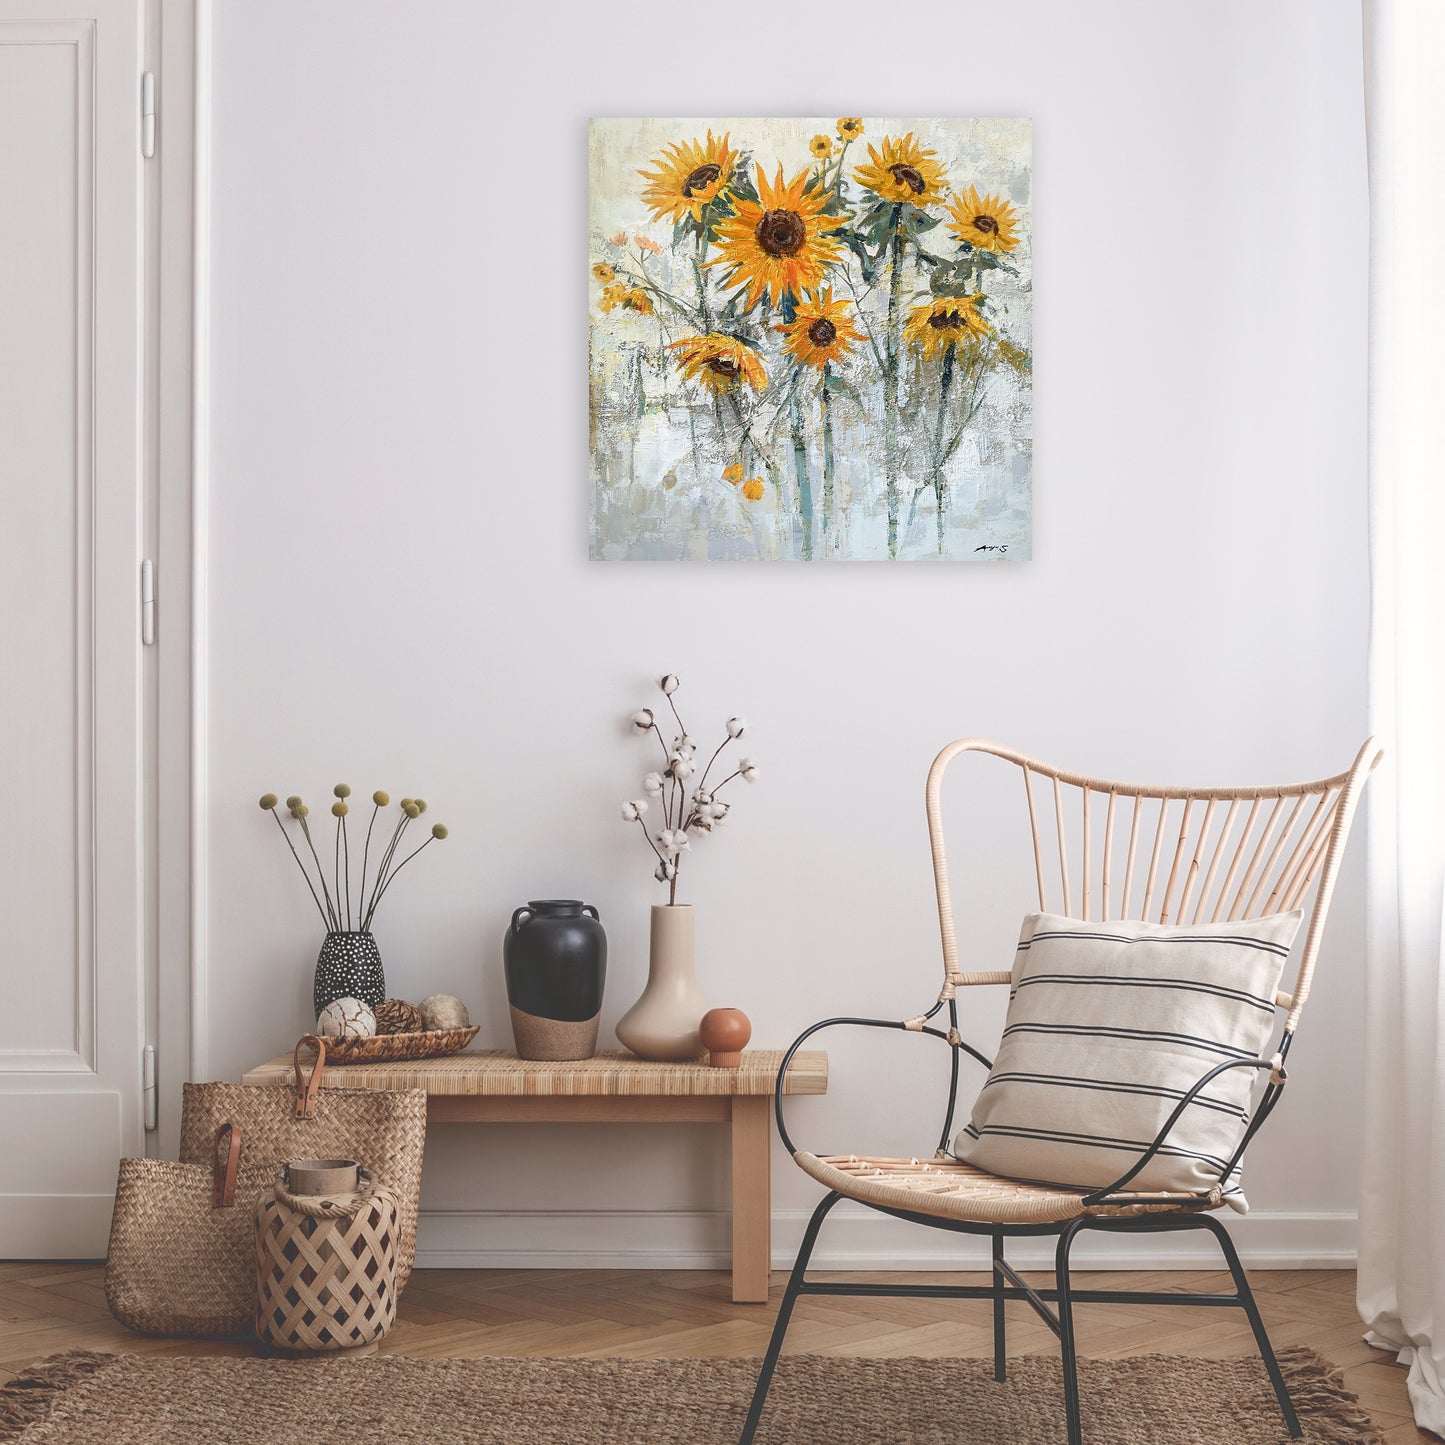 Hand-painted "Vibrant Sunflower" Abstract painting original Art, Canvas Wall art for living room, bedroom,office - Wrapped Canvas Painting